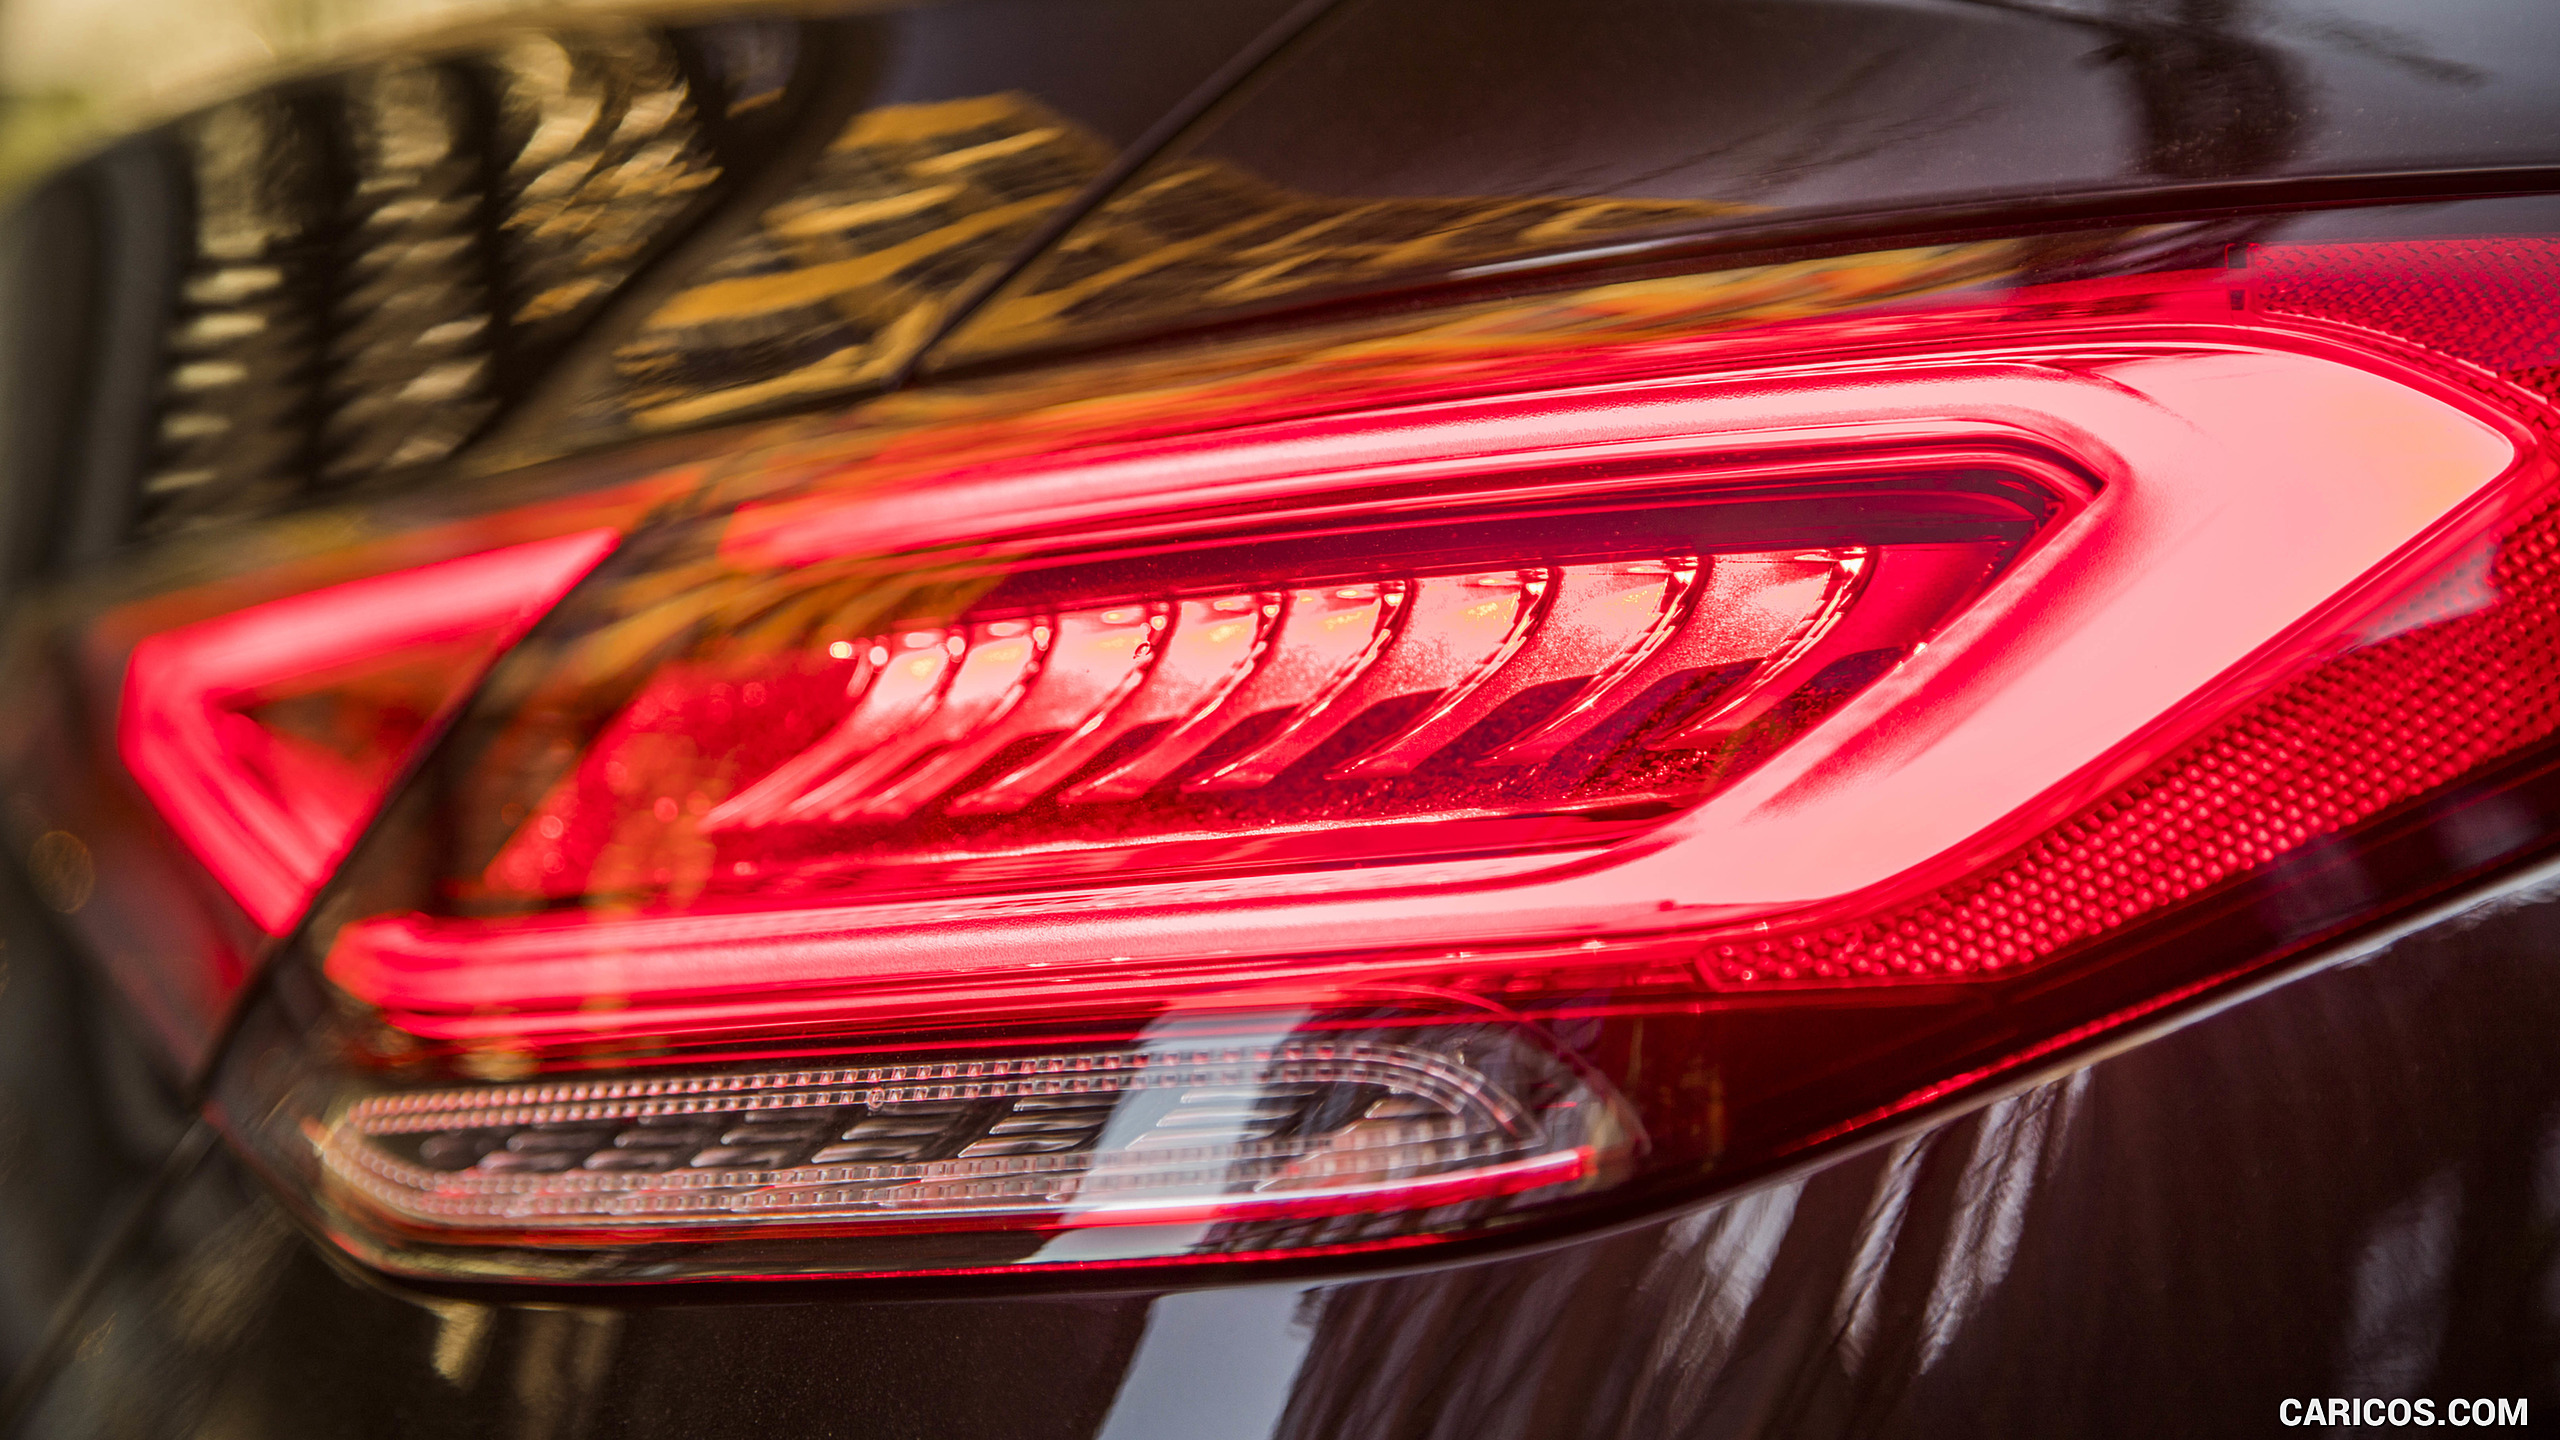 2019 Mercedes-Benz CLS 450 4MATIC (US-Spec) - Tail Light, #175 of 231